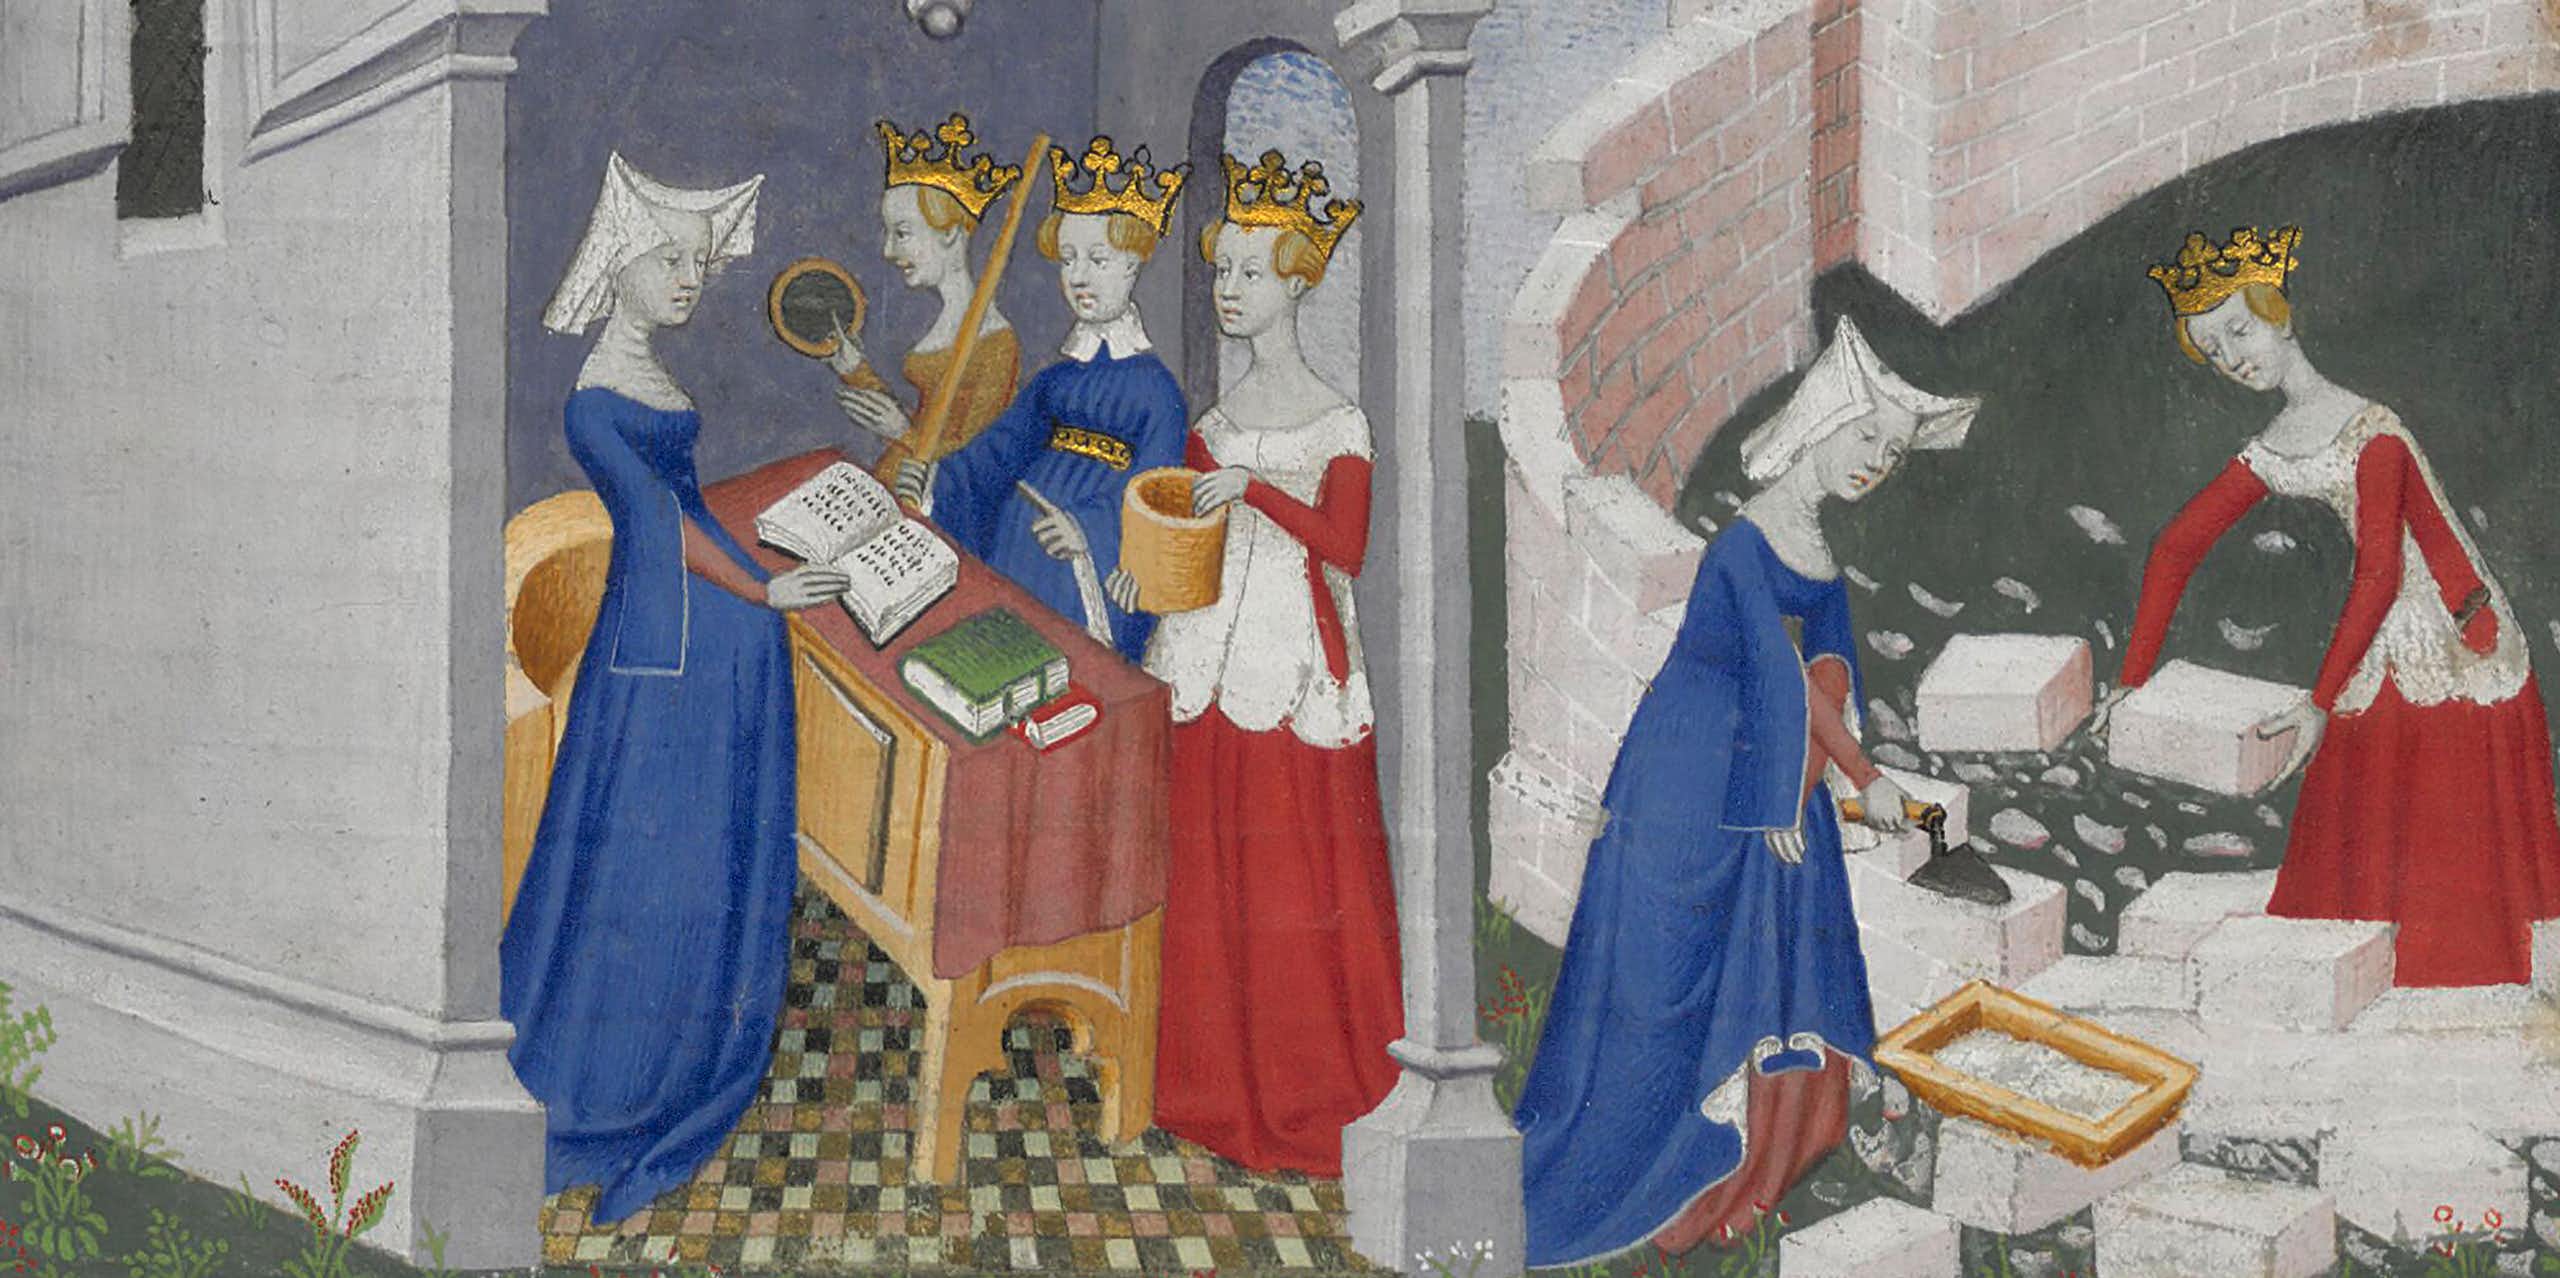 15th century painting of women in red and blue dresses read, play instruments and build a structure.